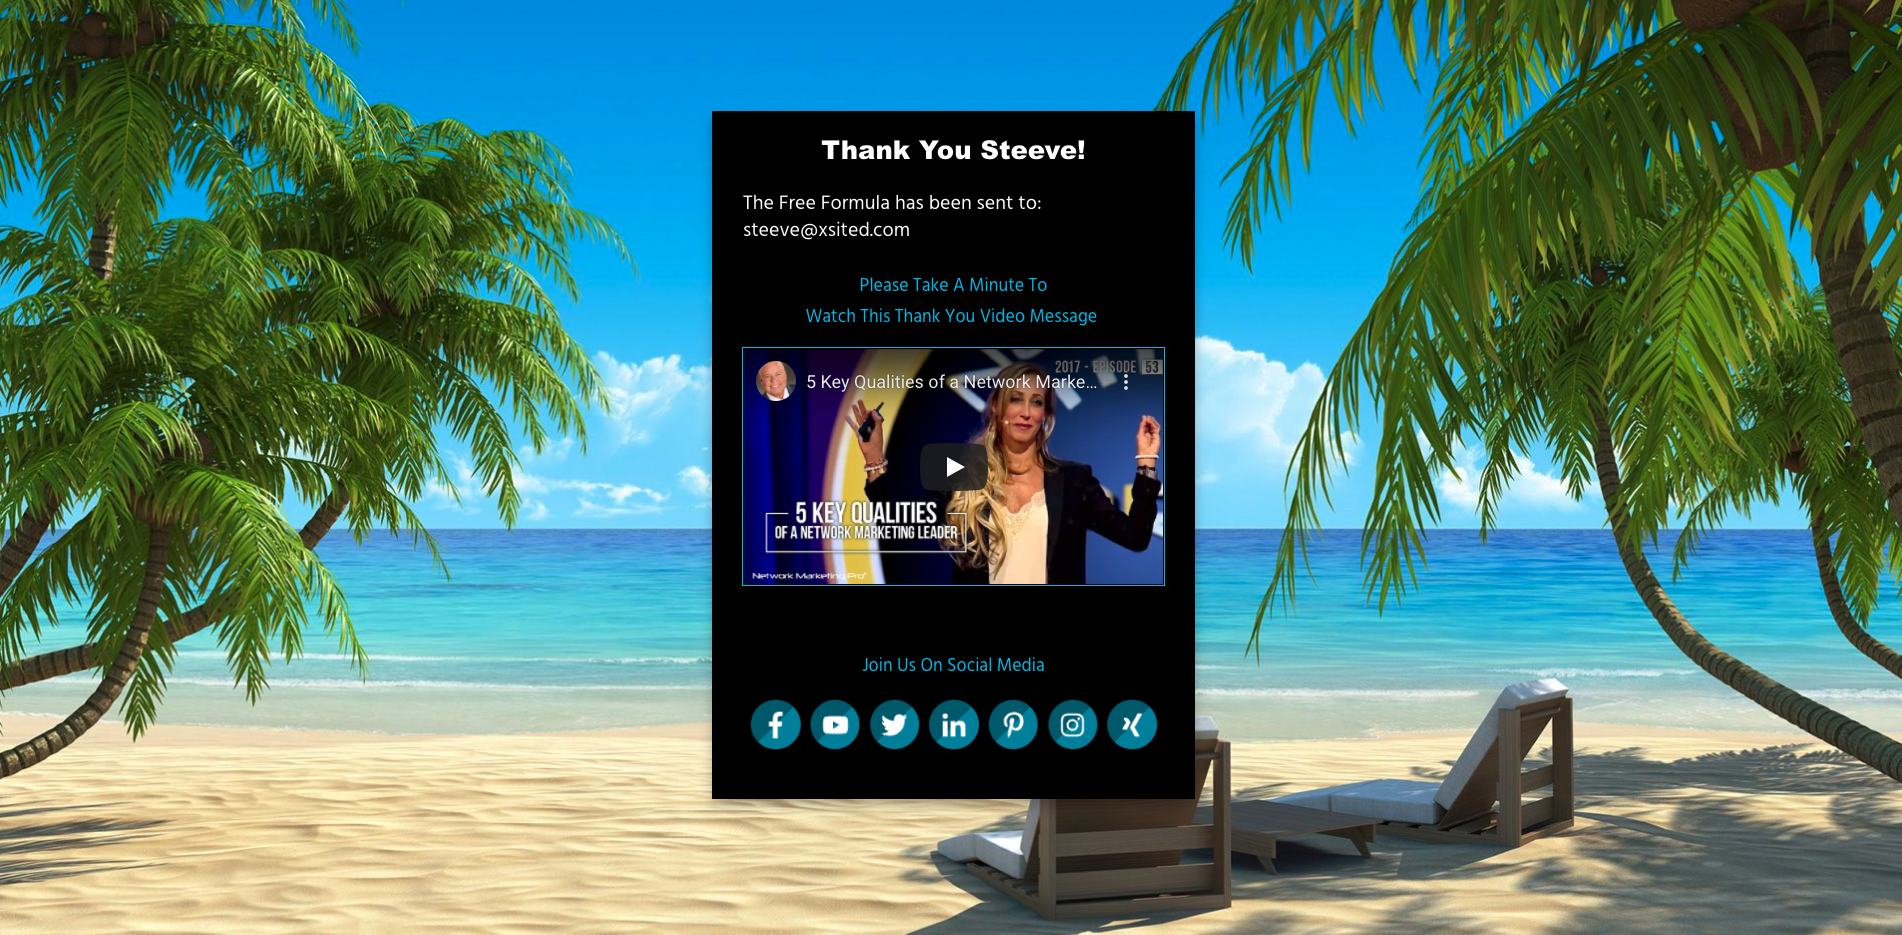 Beach Design Thank You Page With Video